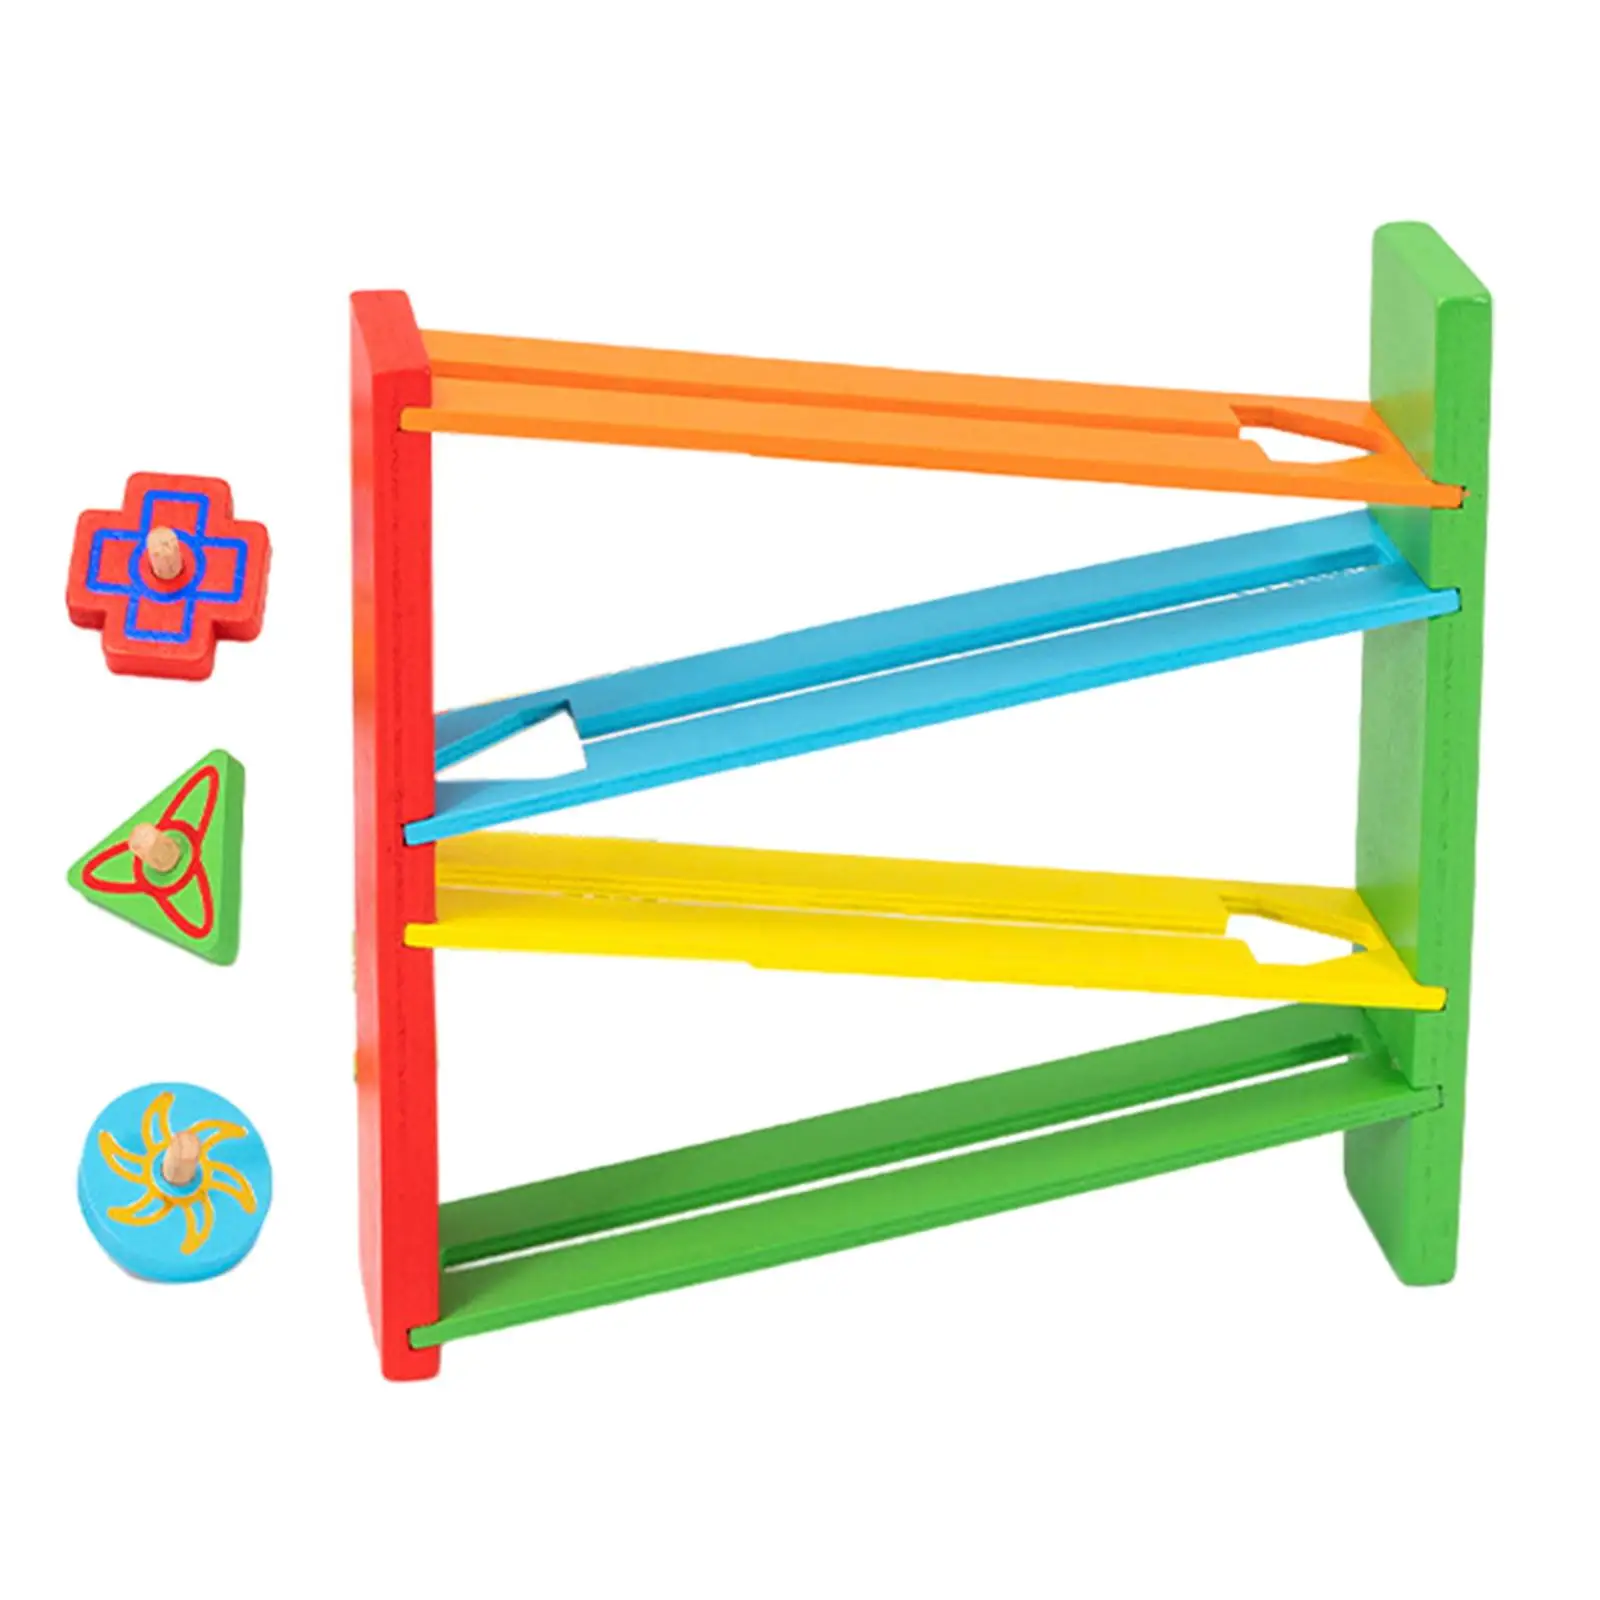 

Race Ramp Toy Learning Toys Interactive Educational Motor Skills Wooden Track for Boys Girls Kids Toddler Birthday Gifts